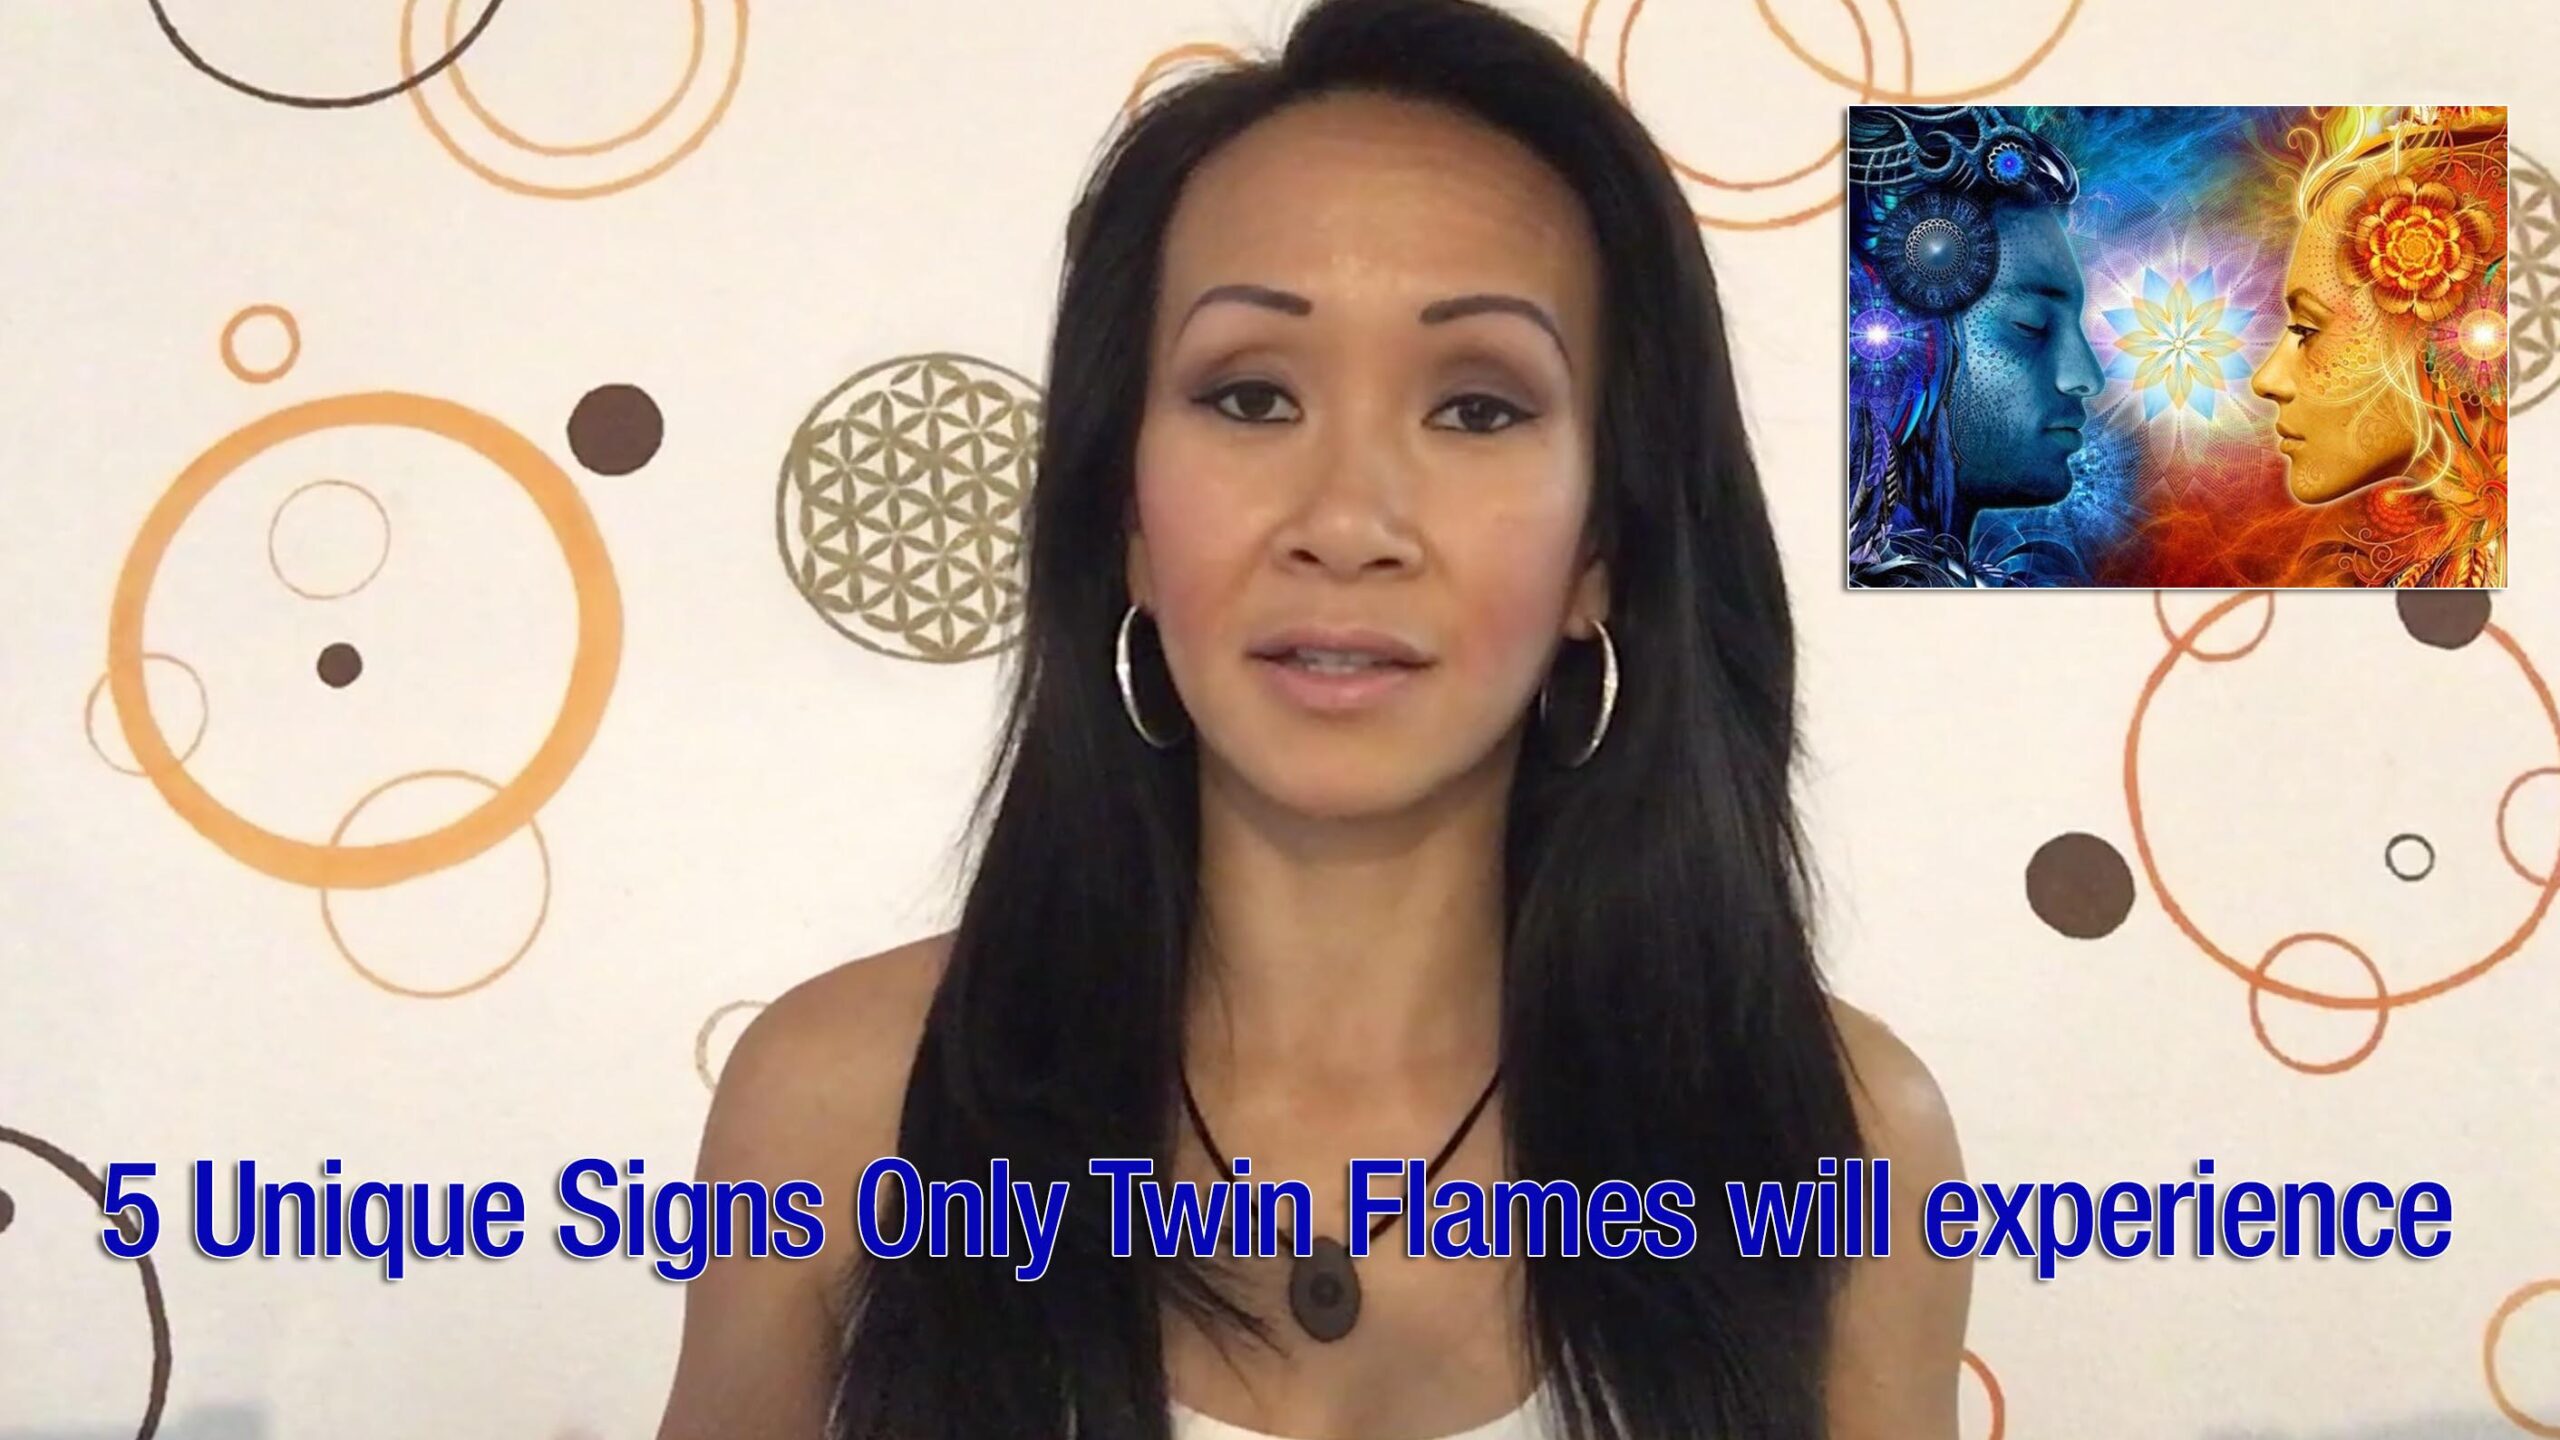 5 Unique Signs Only Twin Flames Will Experience